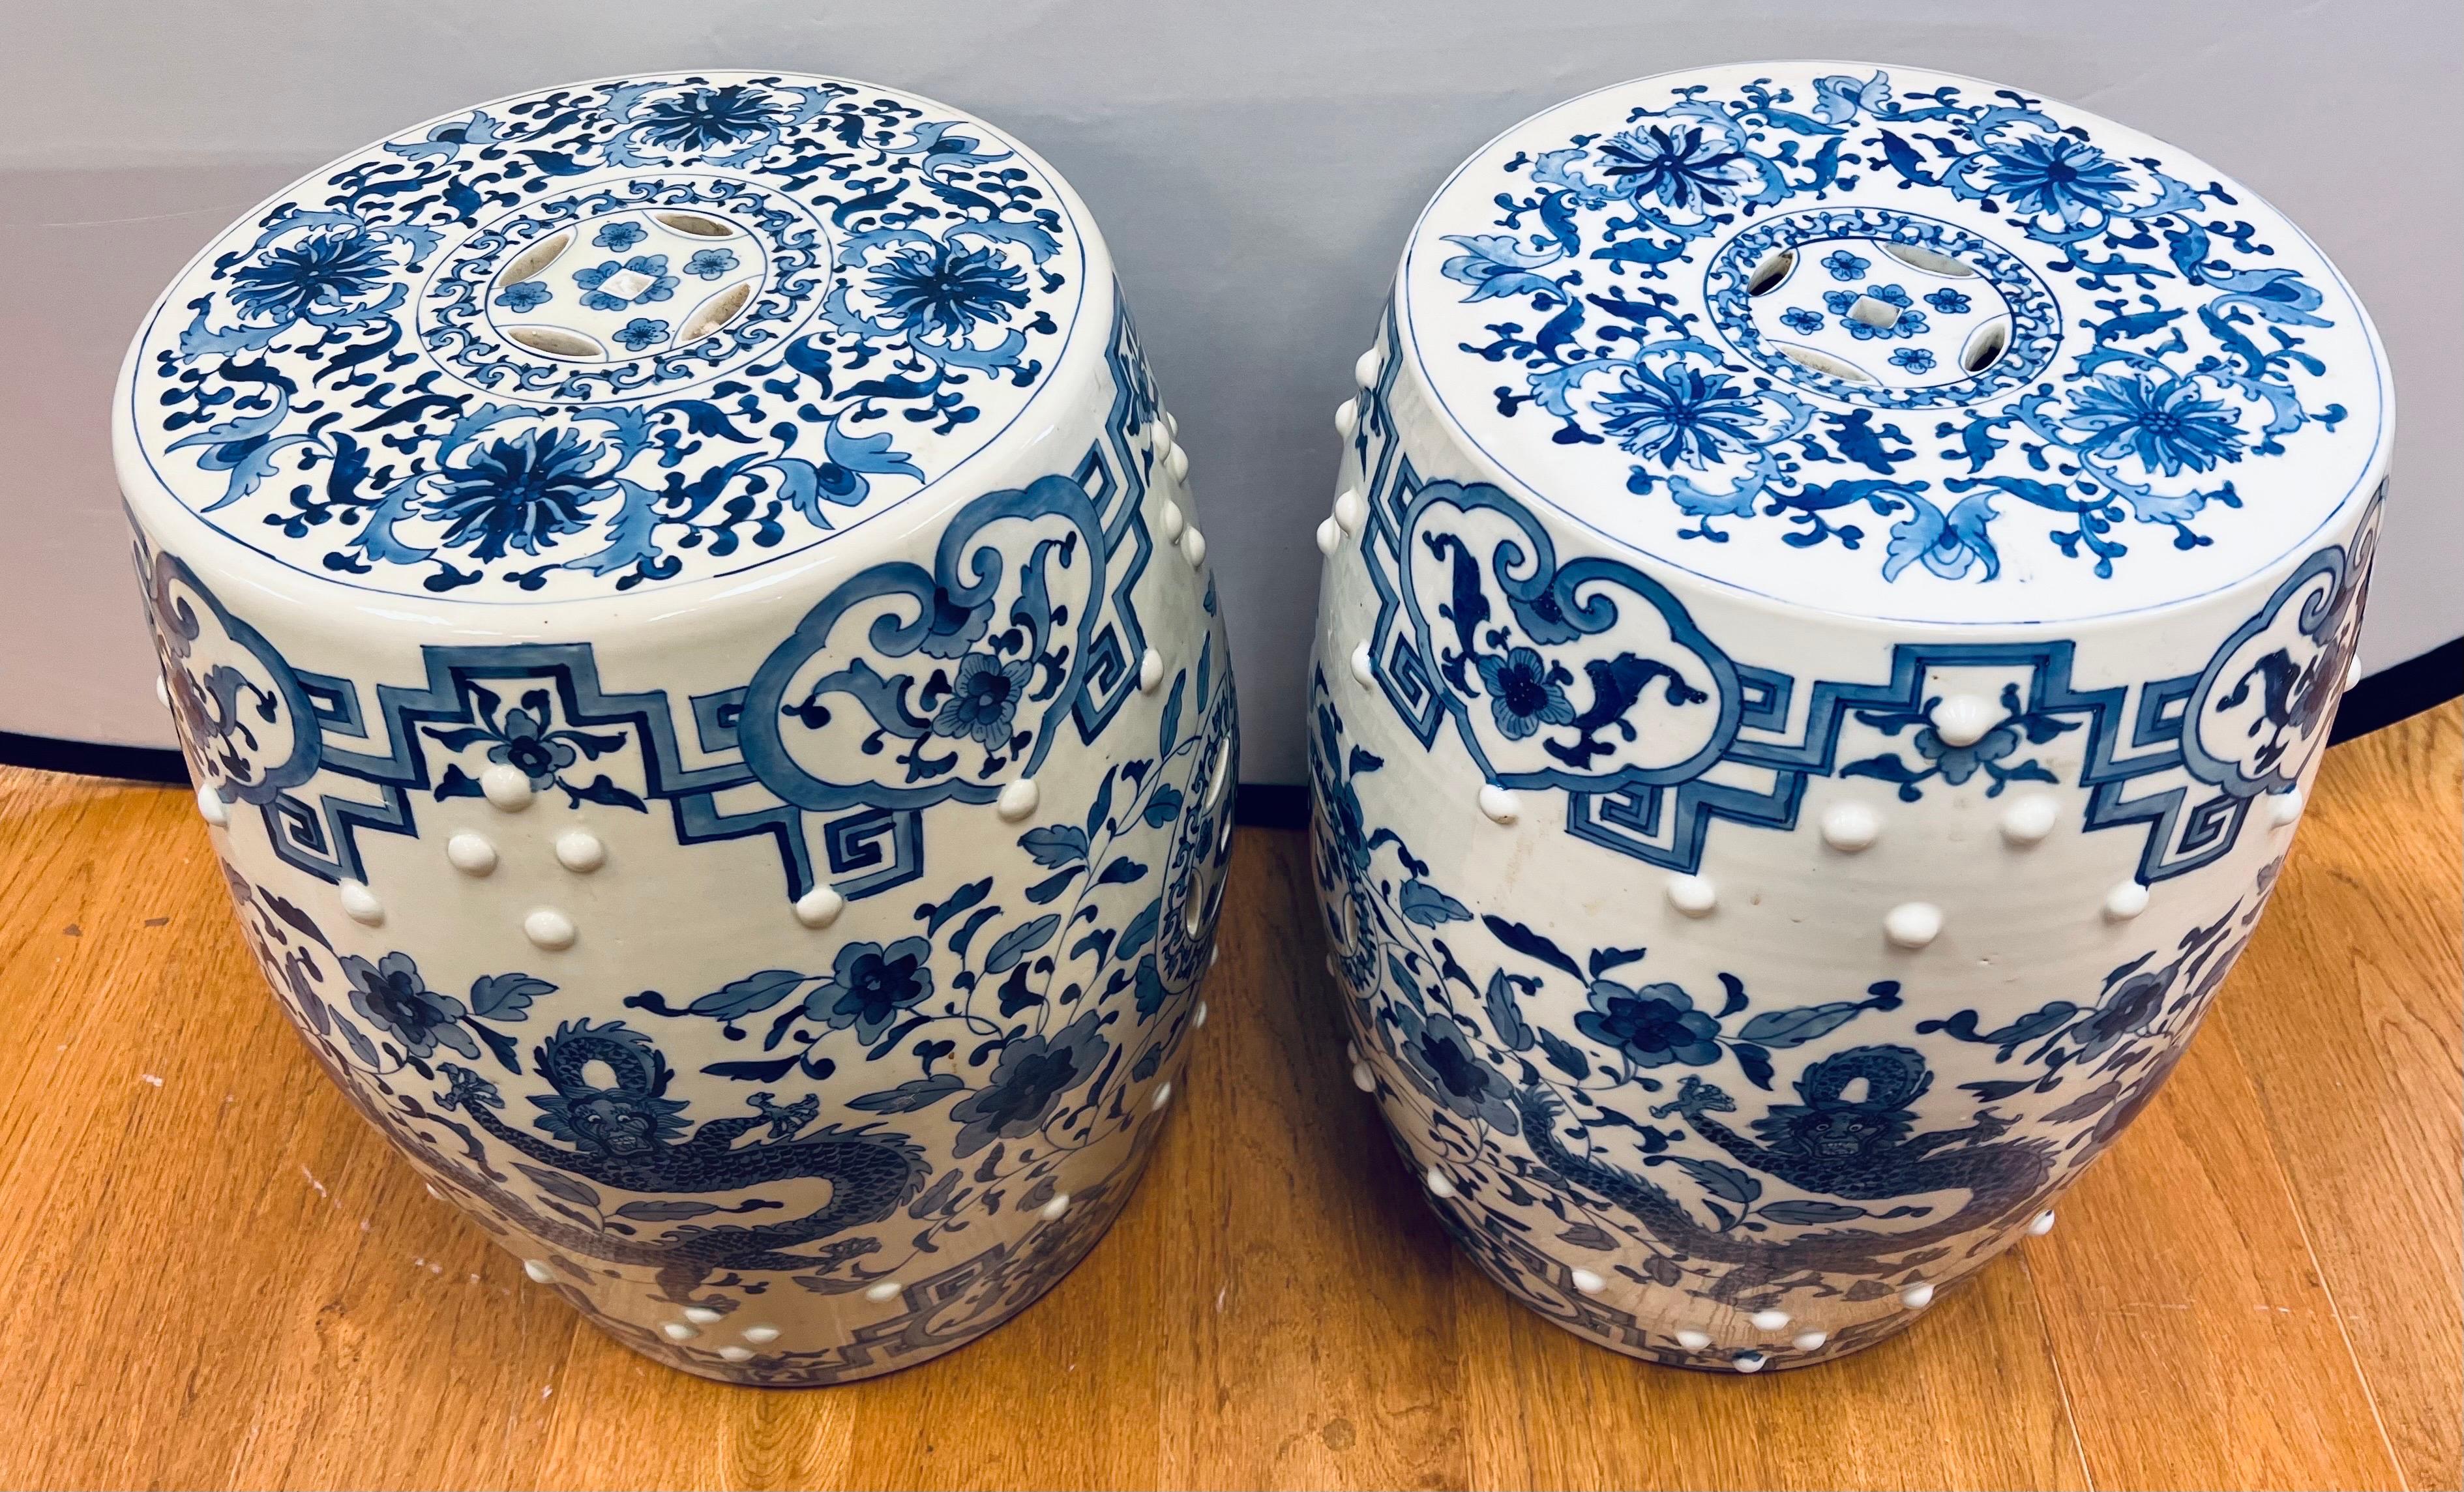 Magnificent pair of chinoiserie porcelain blue and white garden stools or end tables with gorgeous intricate hand painted motifs of dragons and flowers. Pierced detail on the top and sides.